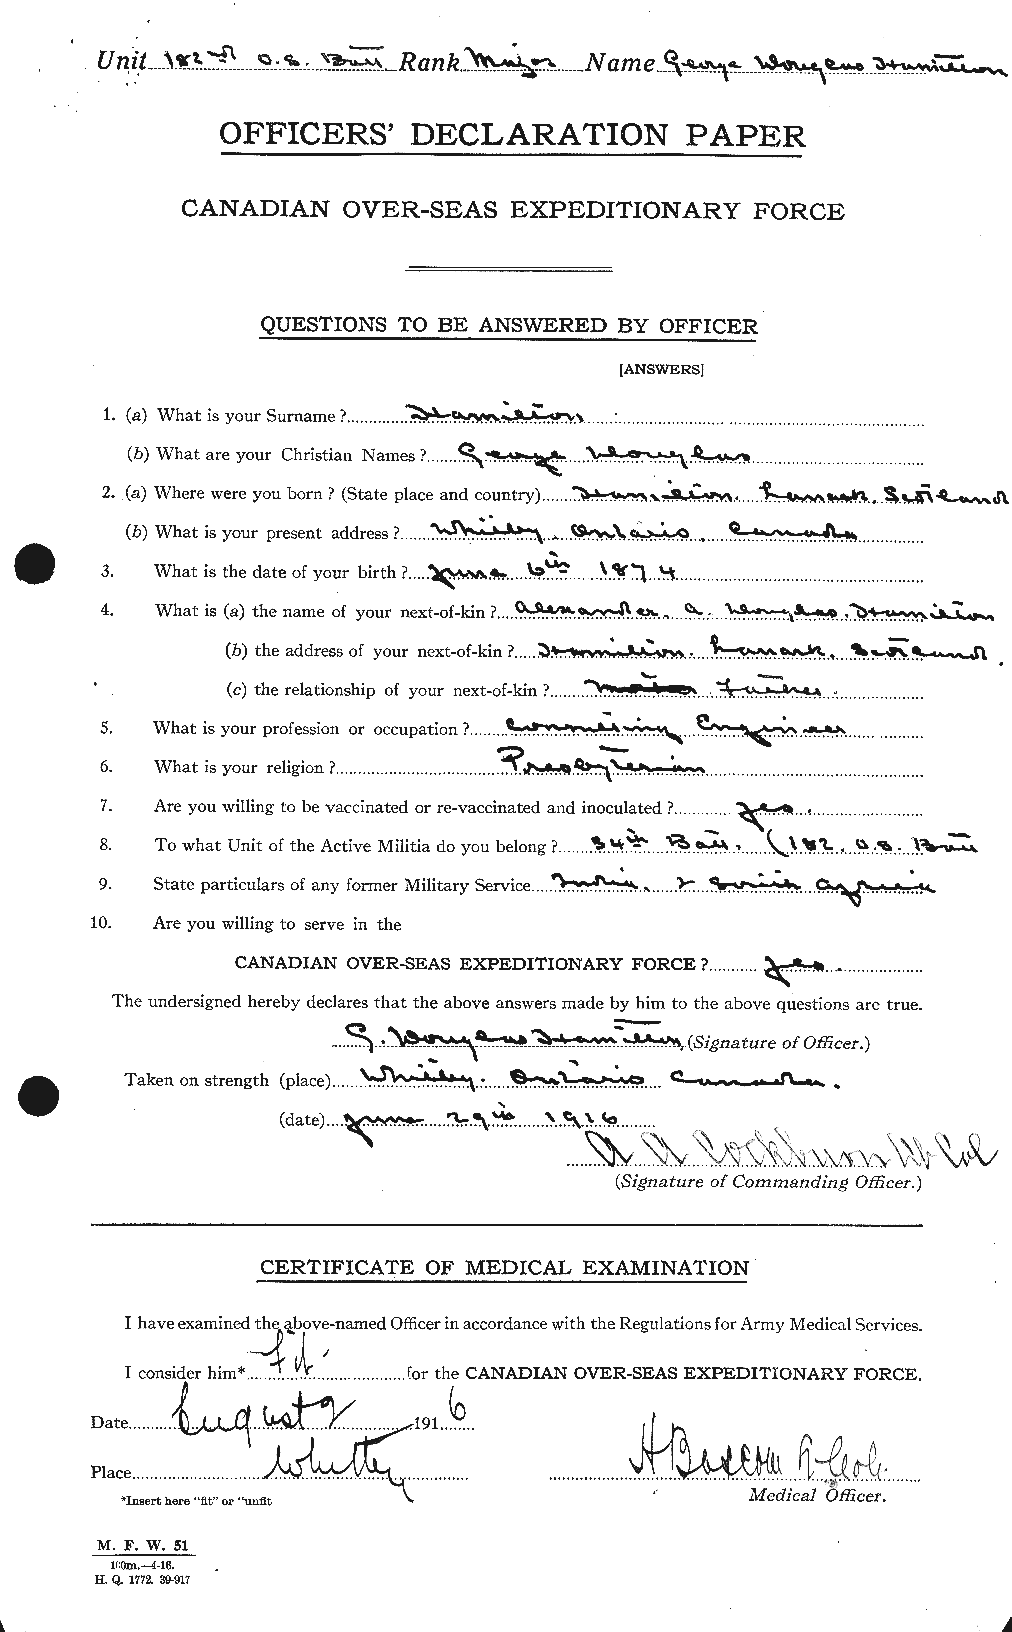 Personnel Records of the First World War - CEF 372453a